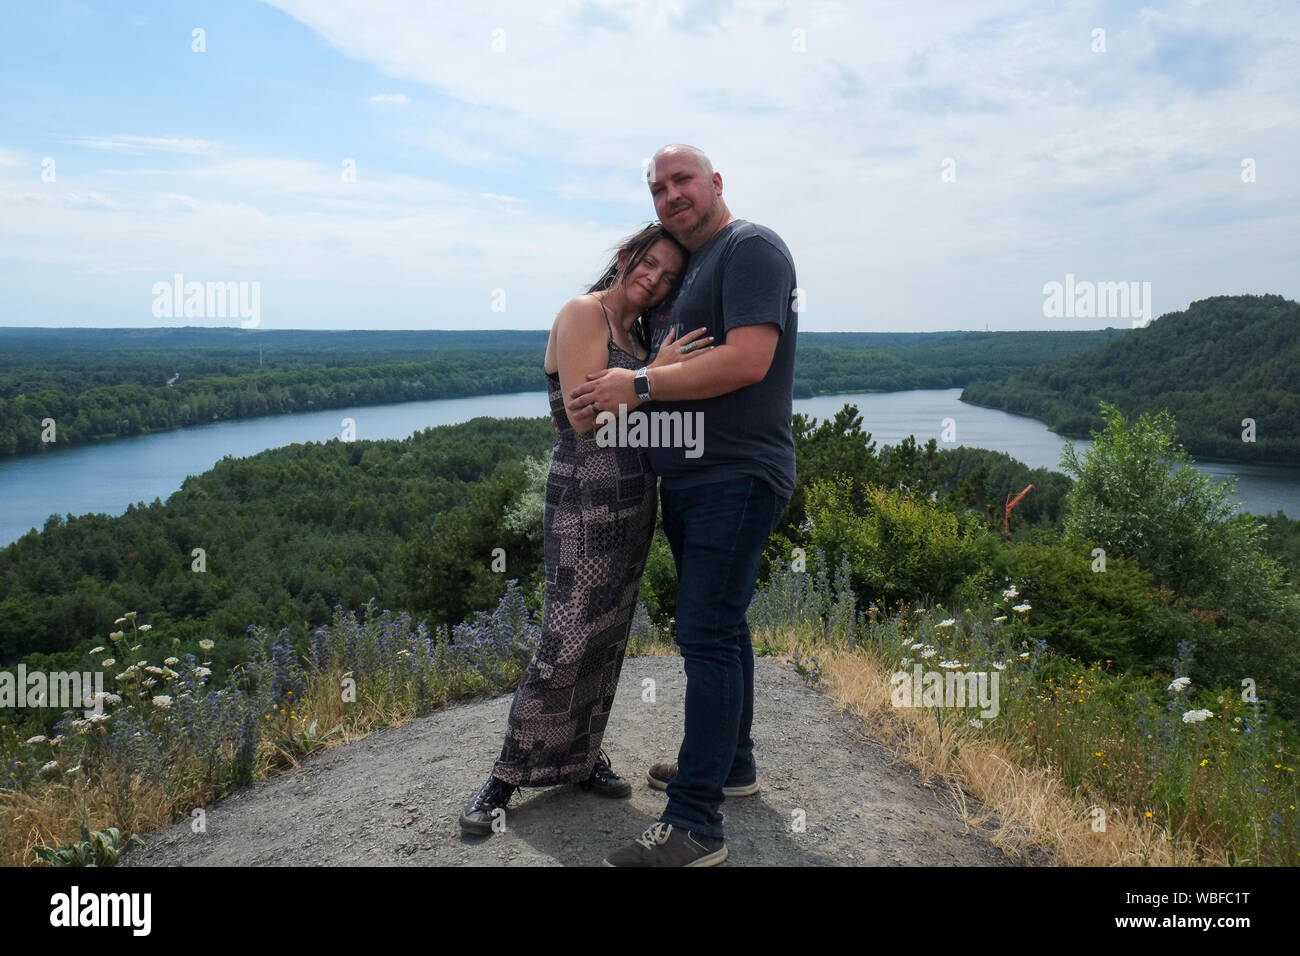 Loving couple of 30-40 years old outdoors hugging and standing tall on a hill with a river running through the woods the background Stock Photo